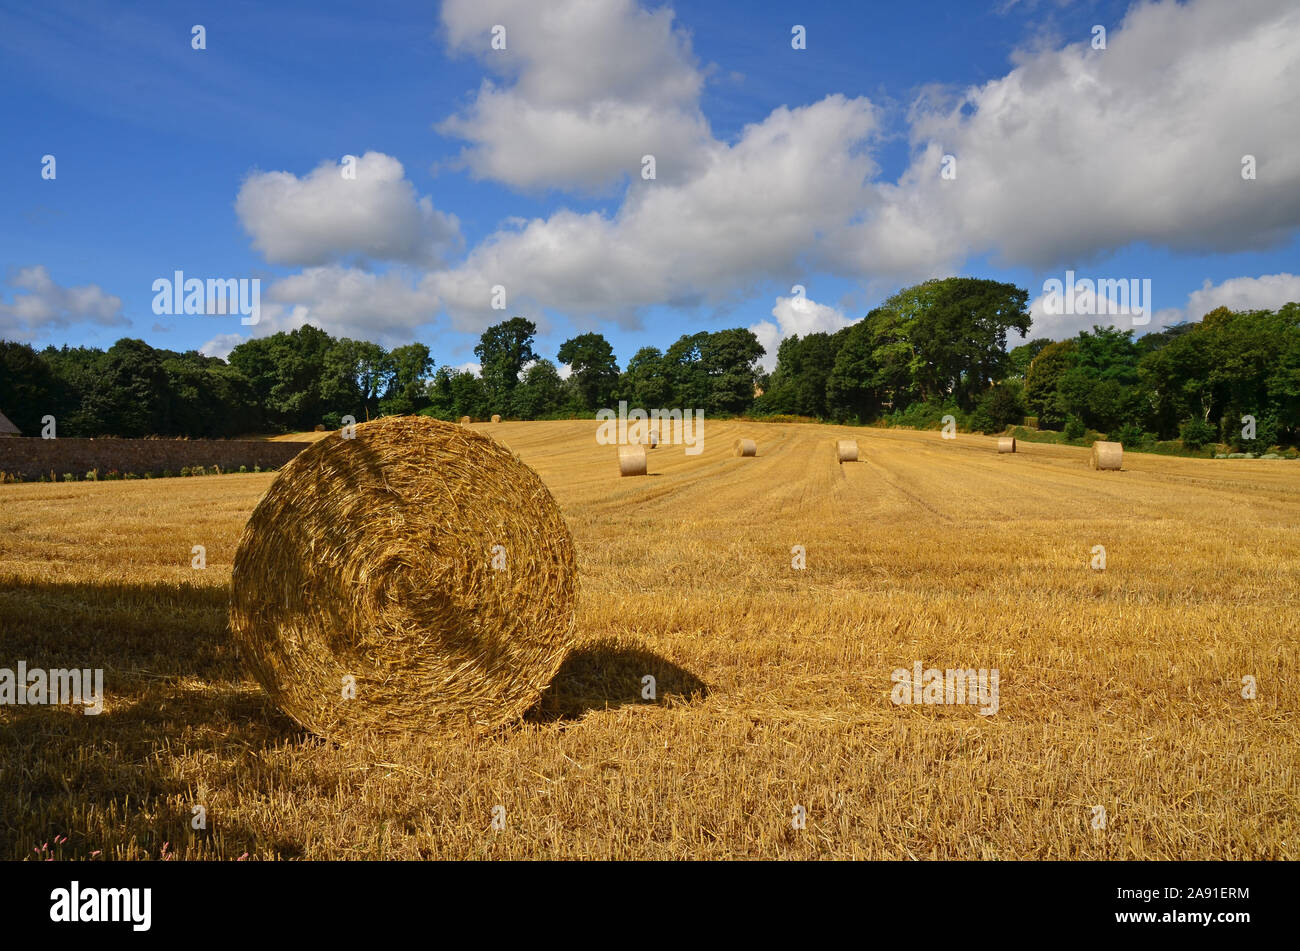 Bales of straw in field, Brittany, France Stock Photo